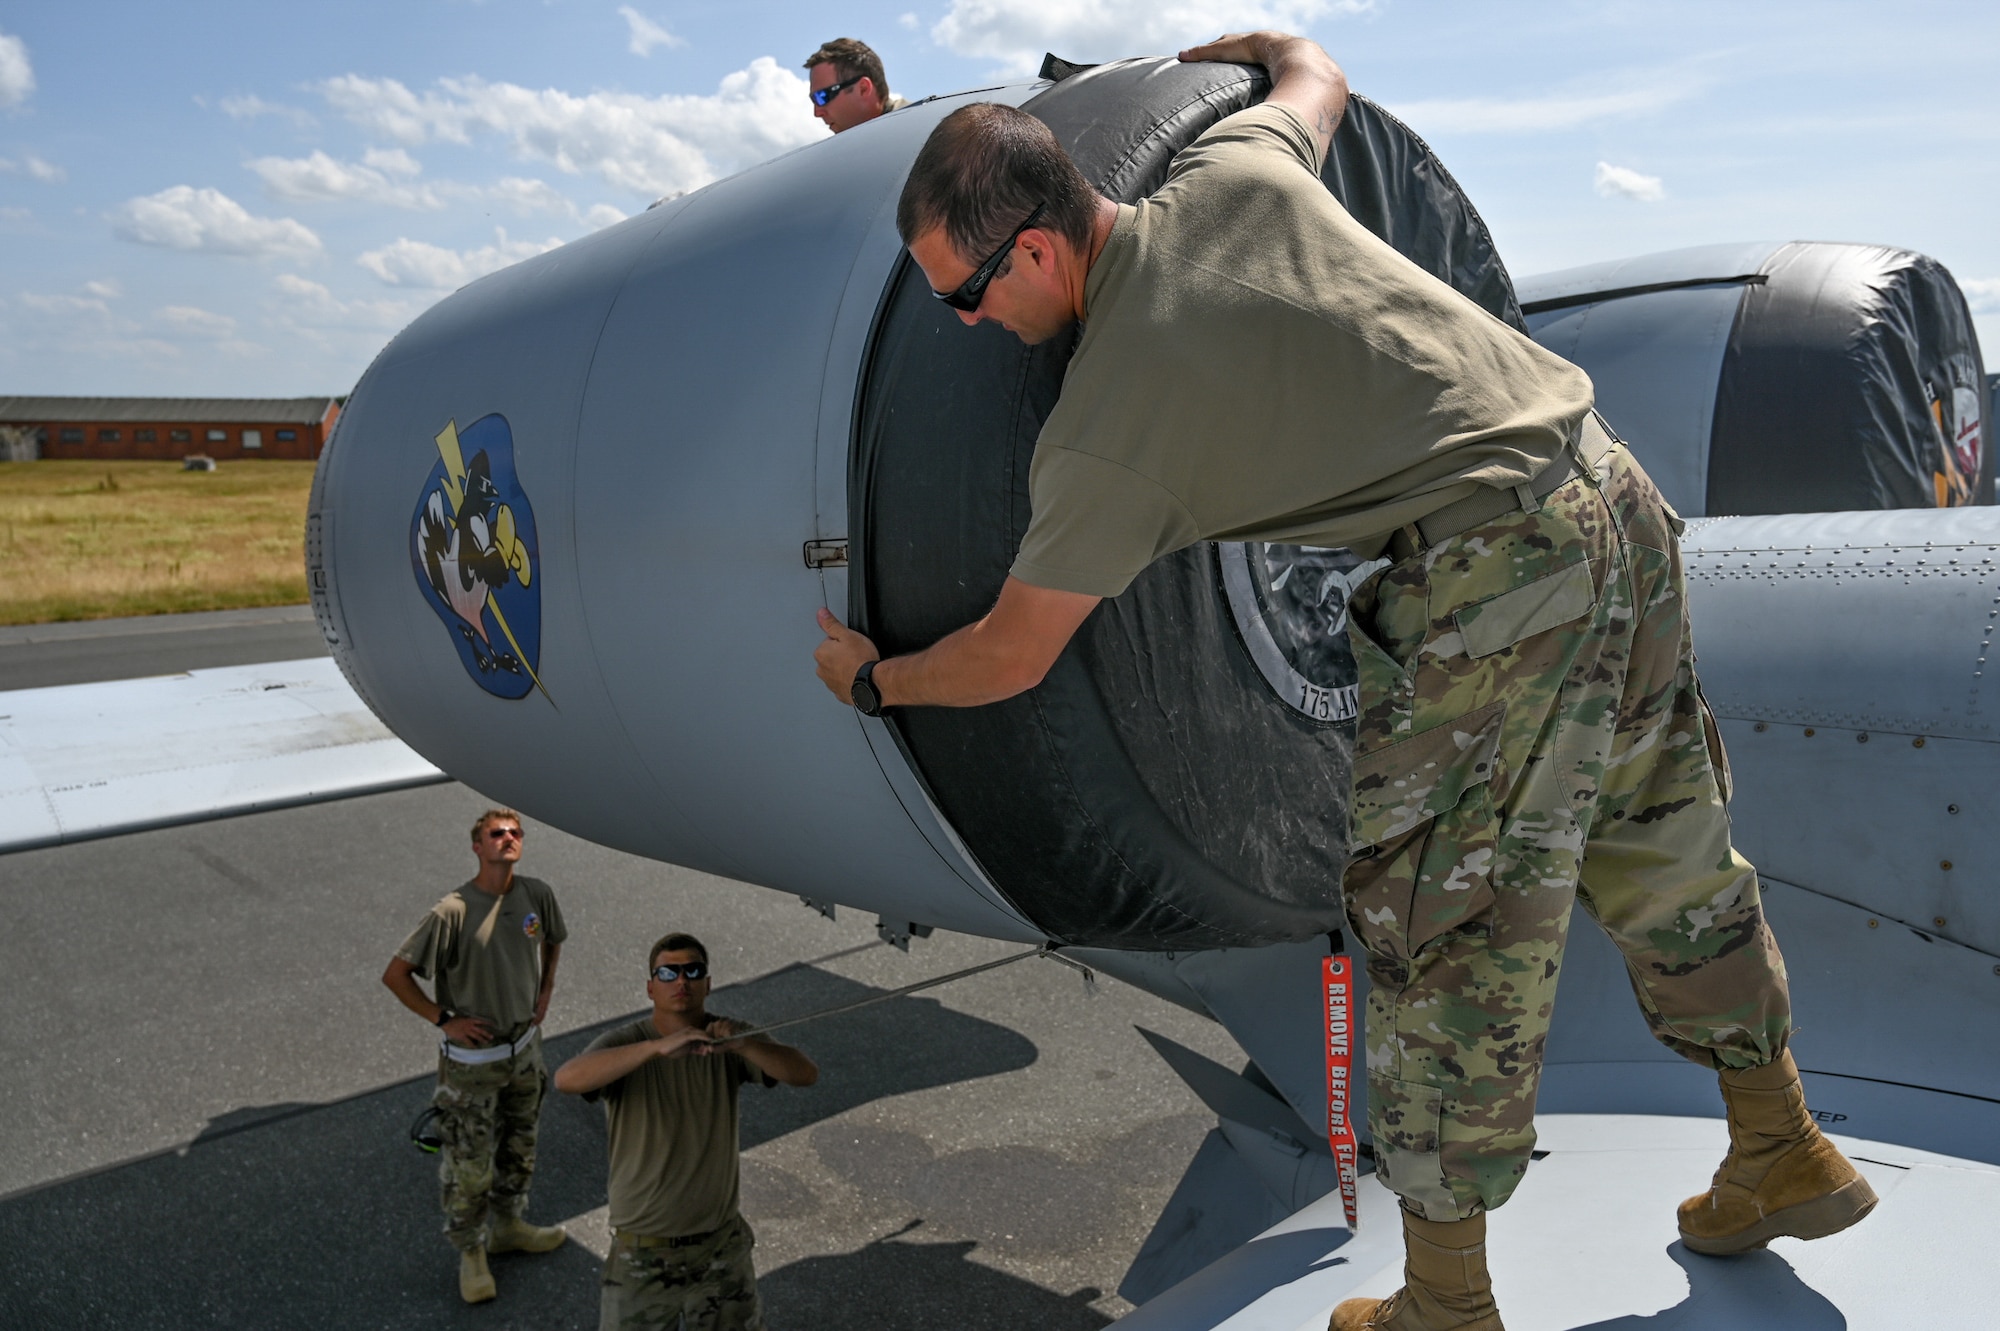 U.S. Air Force Master Sgt. Brendan Sedlak, a crew chief assigned to the 175th Aircraft Maintenance Squadron, 175th Wing, Maryland National Guard, puts an intake cover on an A-10C Thunderbolt II aircraft after the unit’s final training sortie during exercise Air Defender 2023 (AD23), June 22, 2023, at Jagel Air Base, Germany.